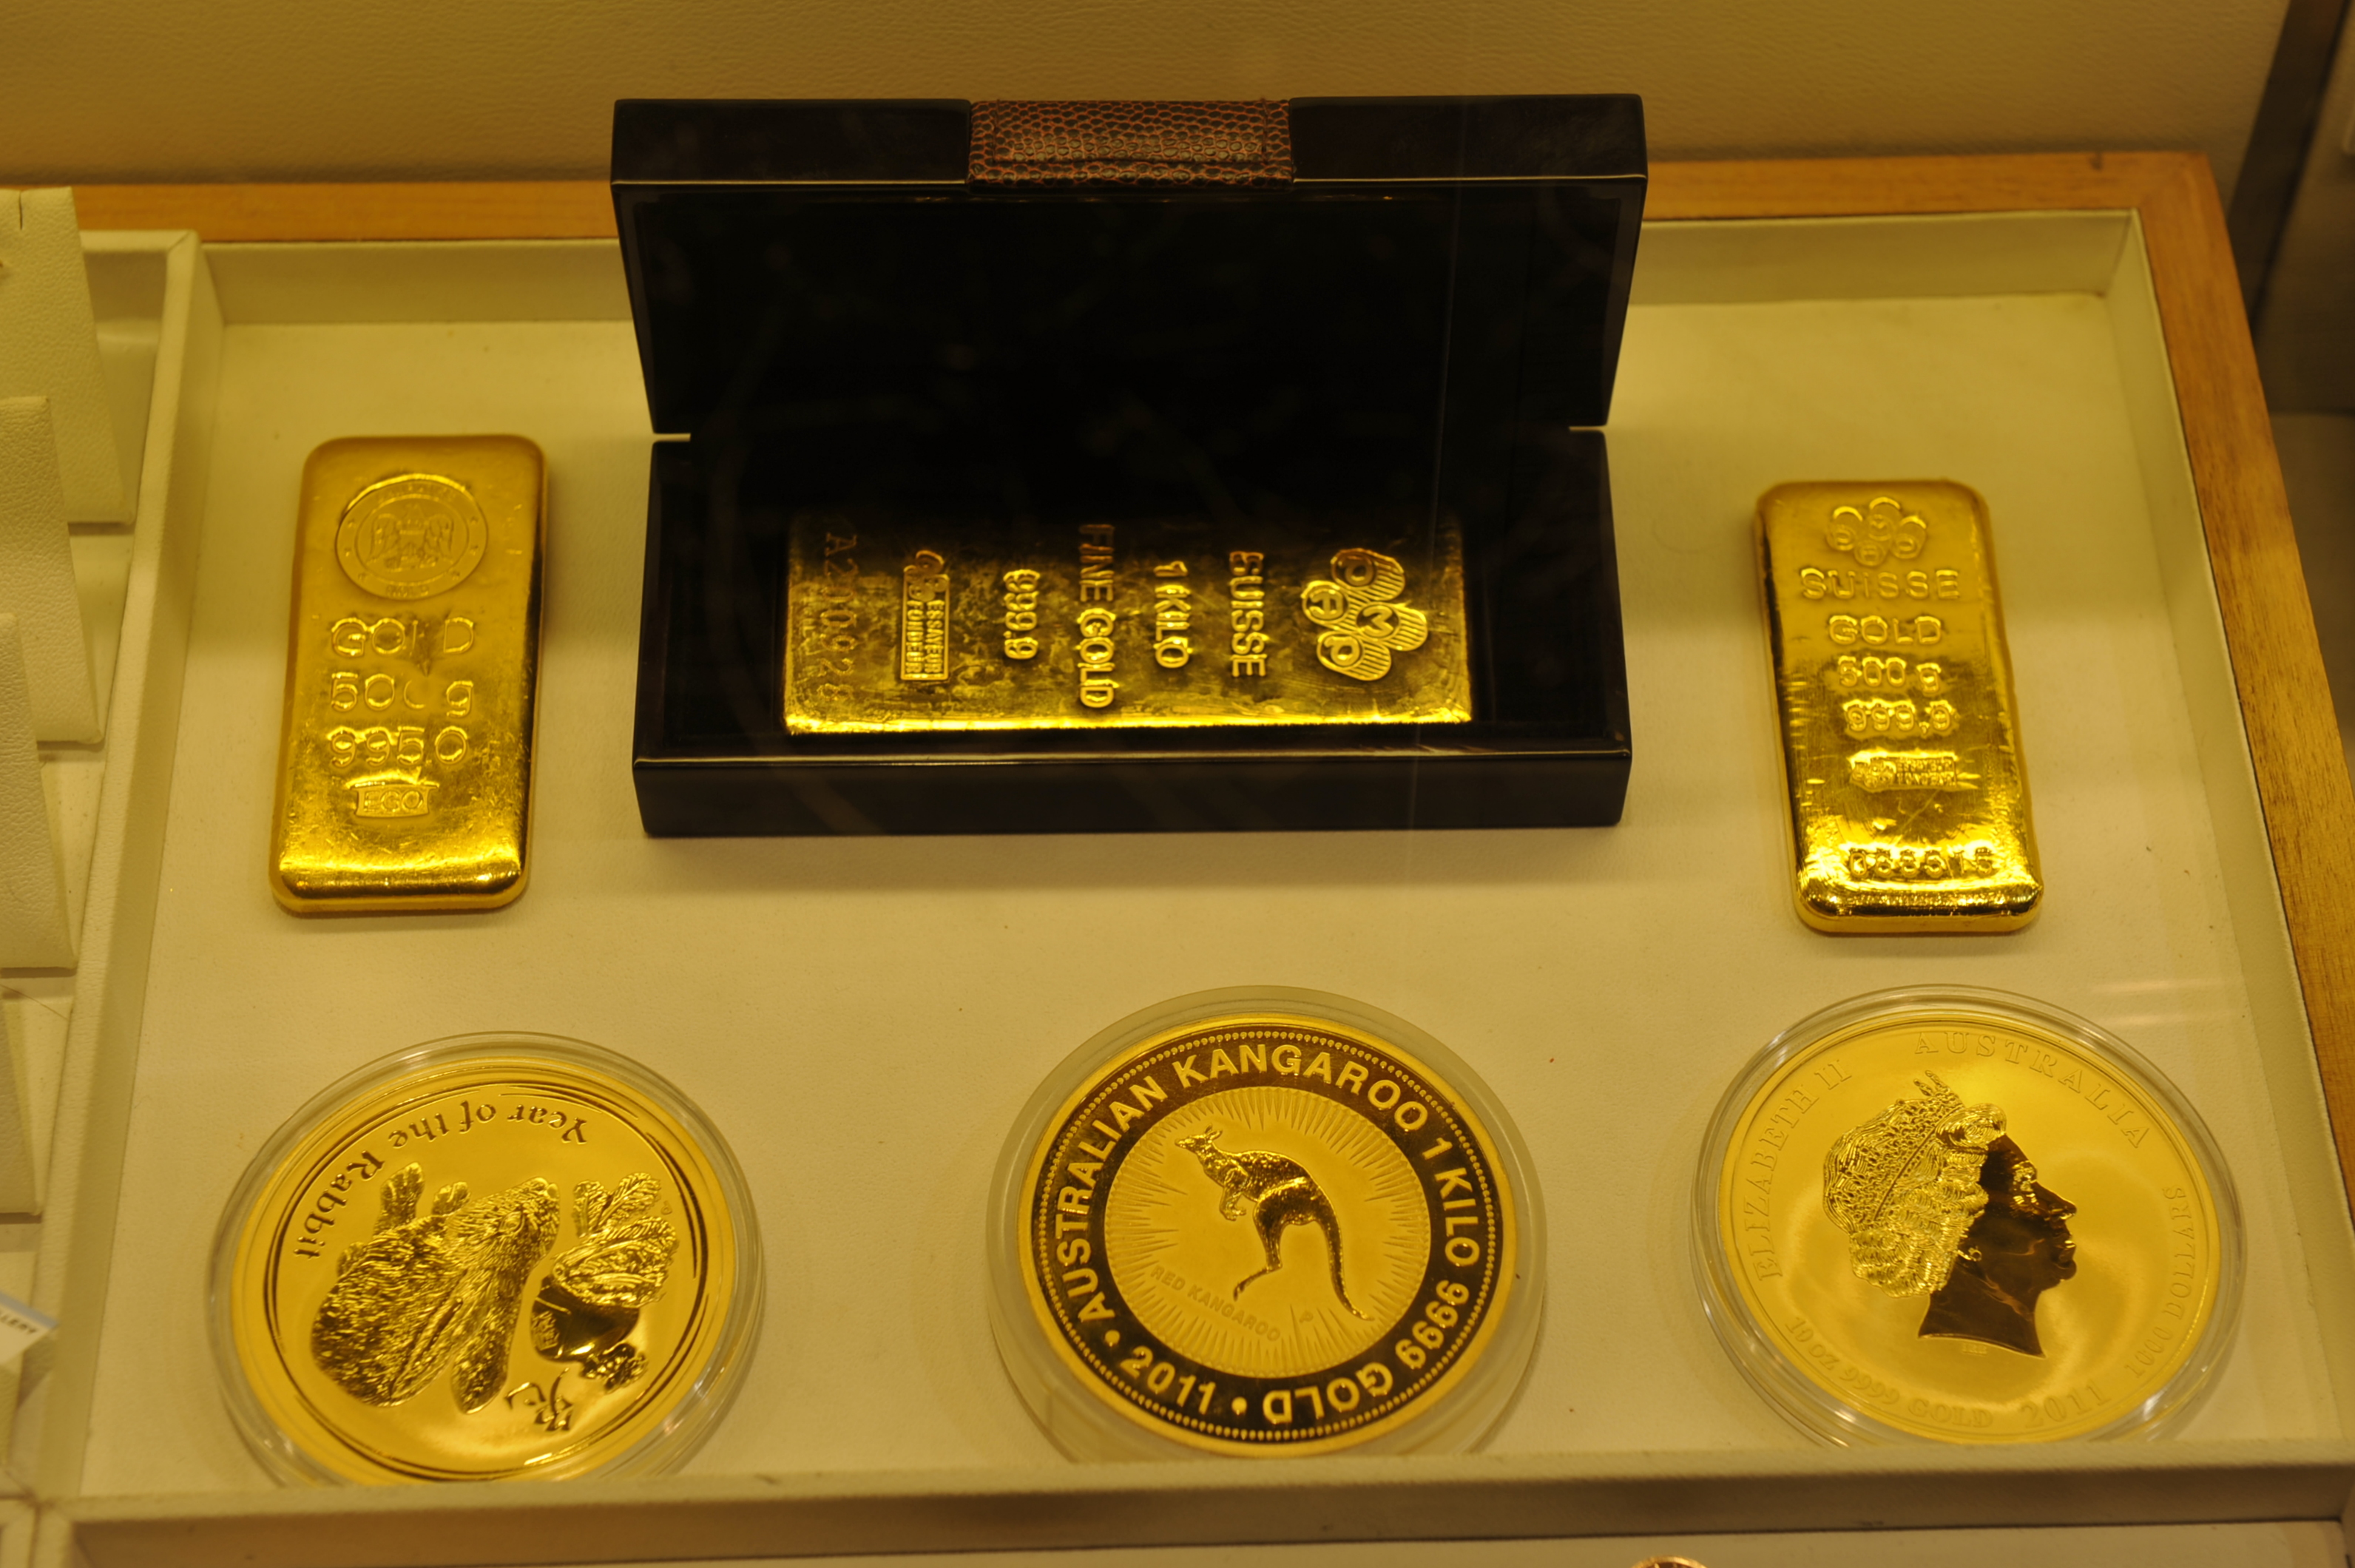 Gold bars or gold coins